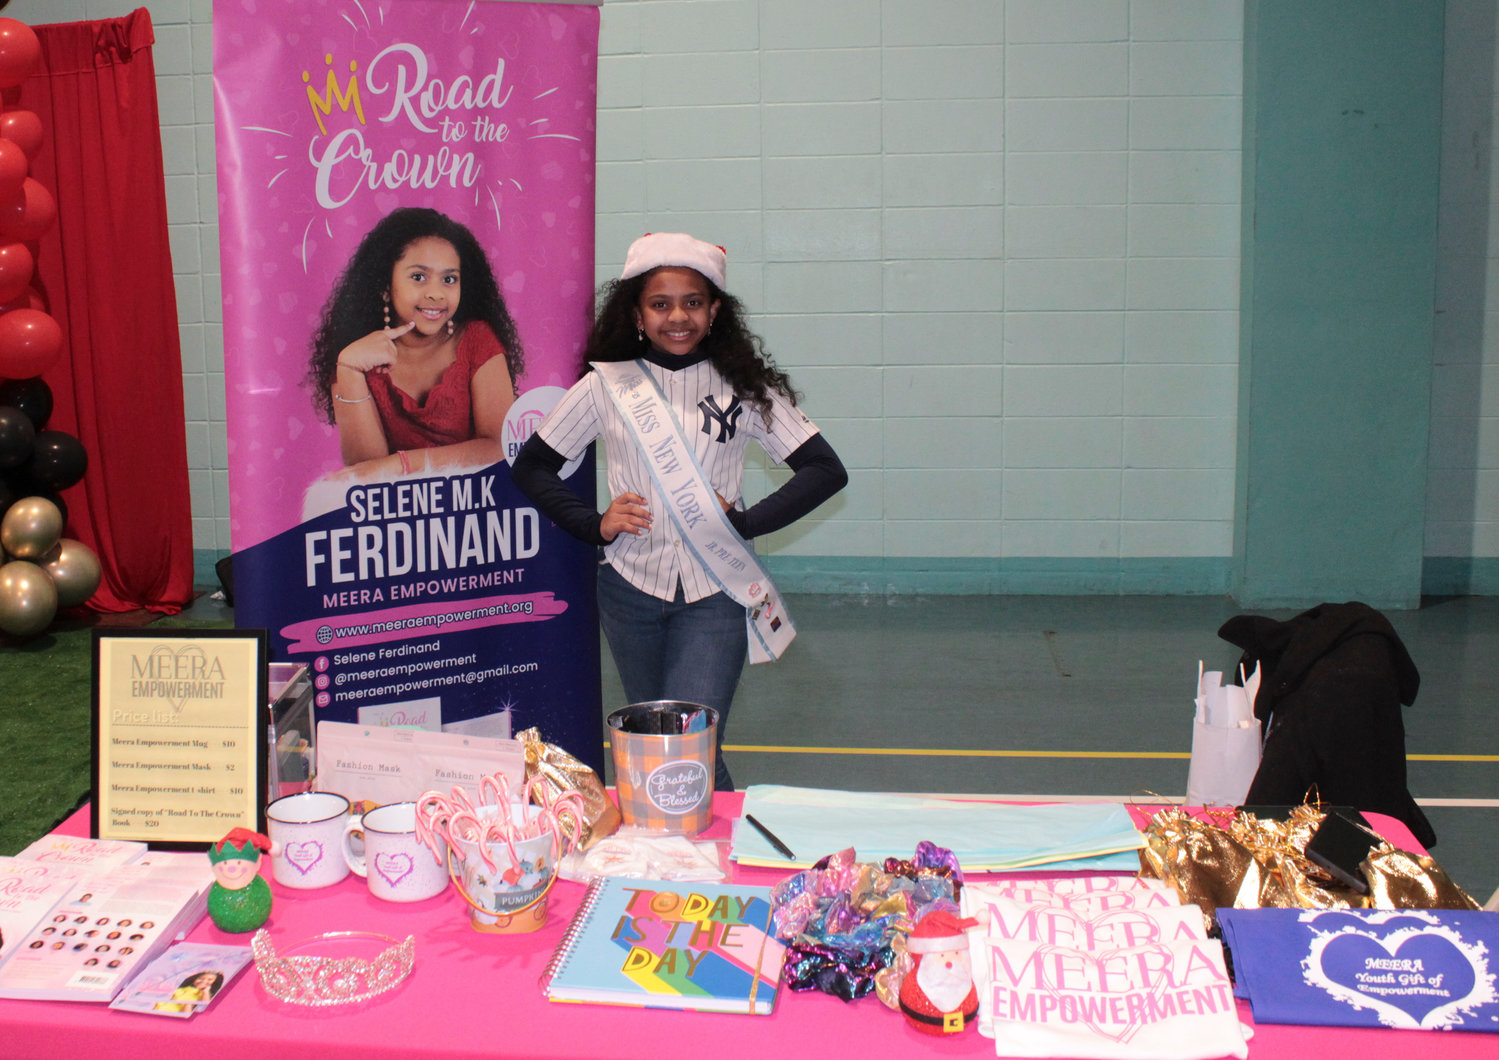 Selene Ferdinand represented the brand she created, Meera Empowerment, with pride at the Young Entrepreneurs Expo. Ferdinand promoted her book, ‘Road to the Crown,’ which she co-wrote with 17 other young women from the world of beauty pageants, as well as other merchandise for her organization.